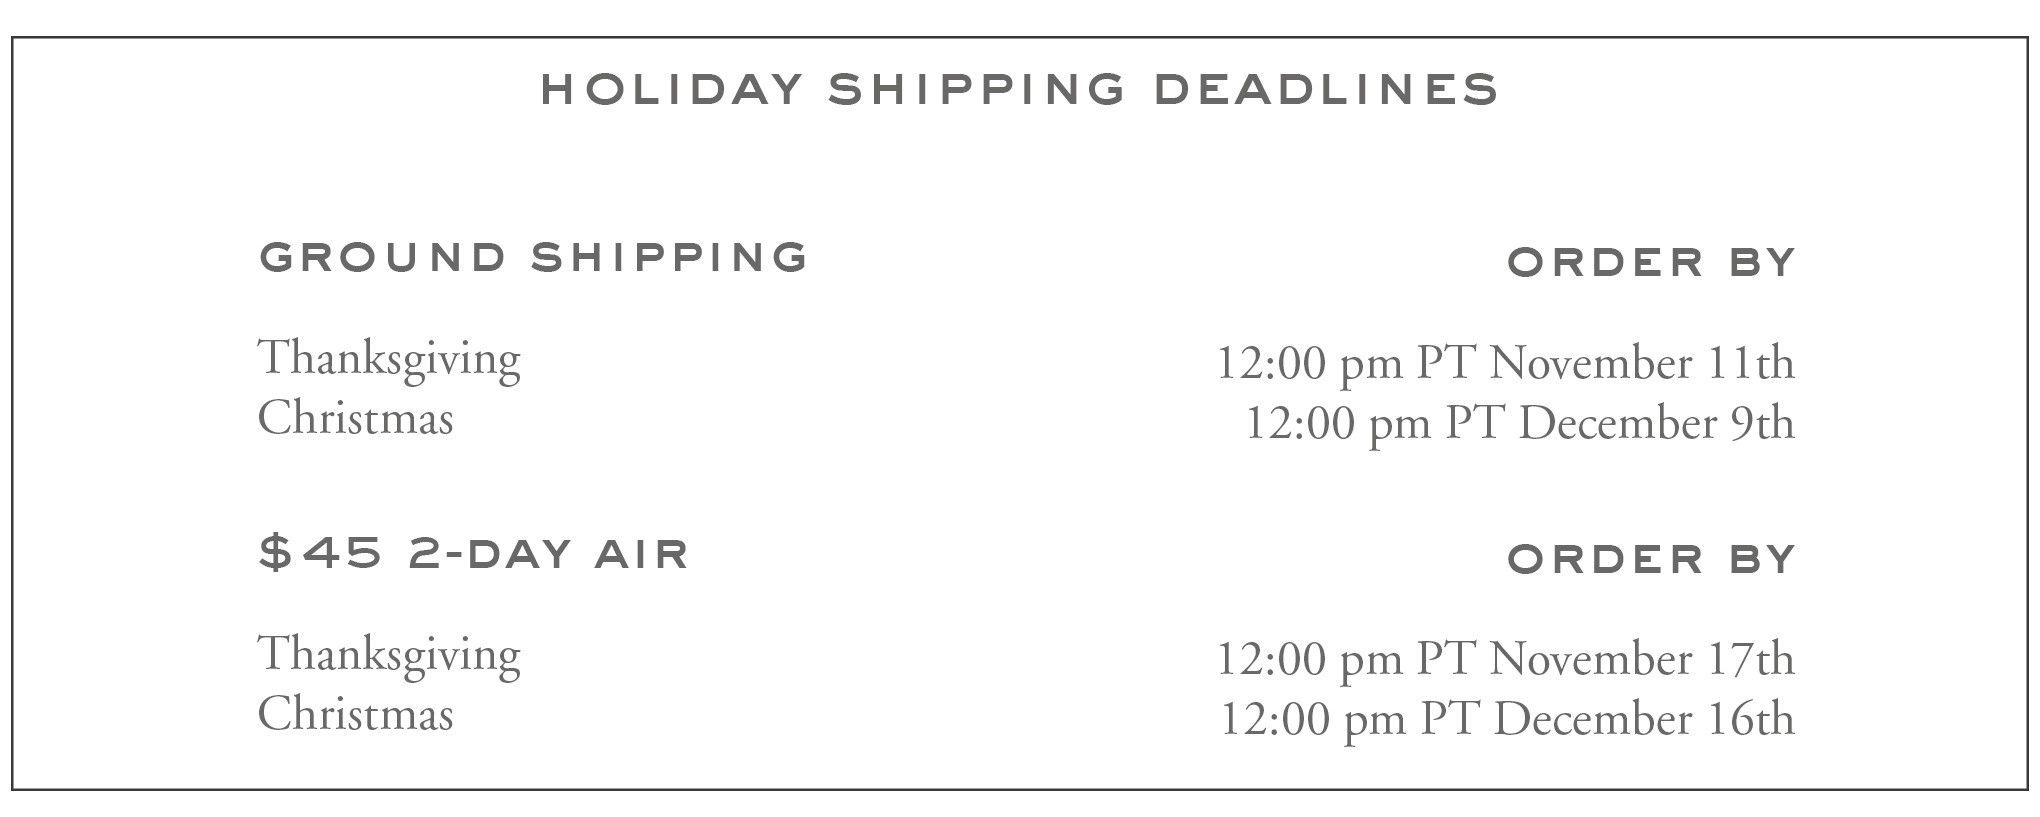 Turnbull Holiday Shipping Deadline Graphic: Thanksgiving Ground Shipping Deadline: 12:00 pm PST November 11th. Thanksgiving 2-Day Shipping Deadline: 12:00 pm PST November 17th. Christmas Ground Shipping Deadline: 12:00 pm PST December 9th. Christmas 2-Day Shipping Deadline: 12:00 pm PST December 16th.